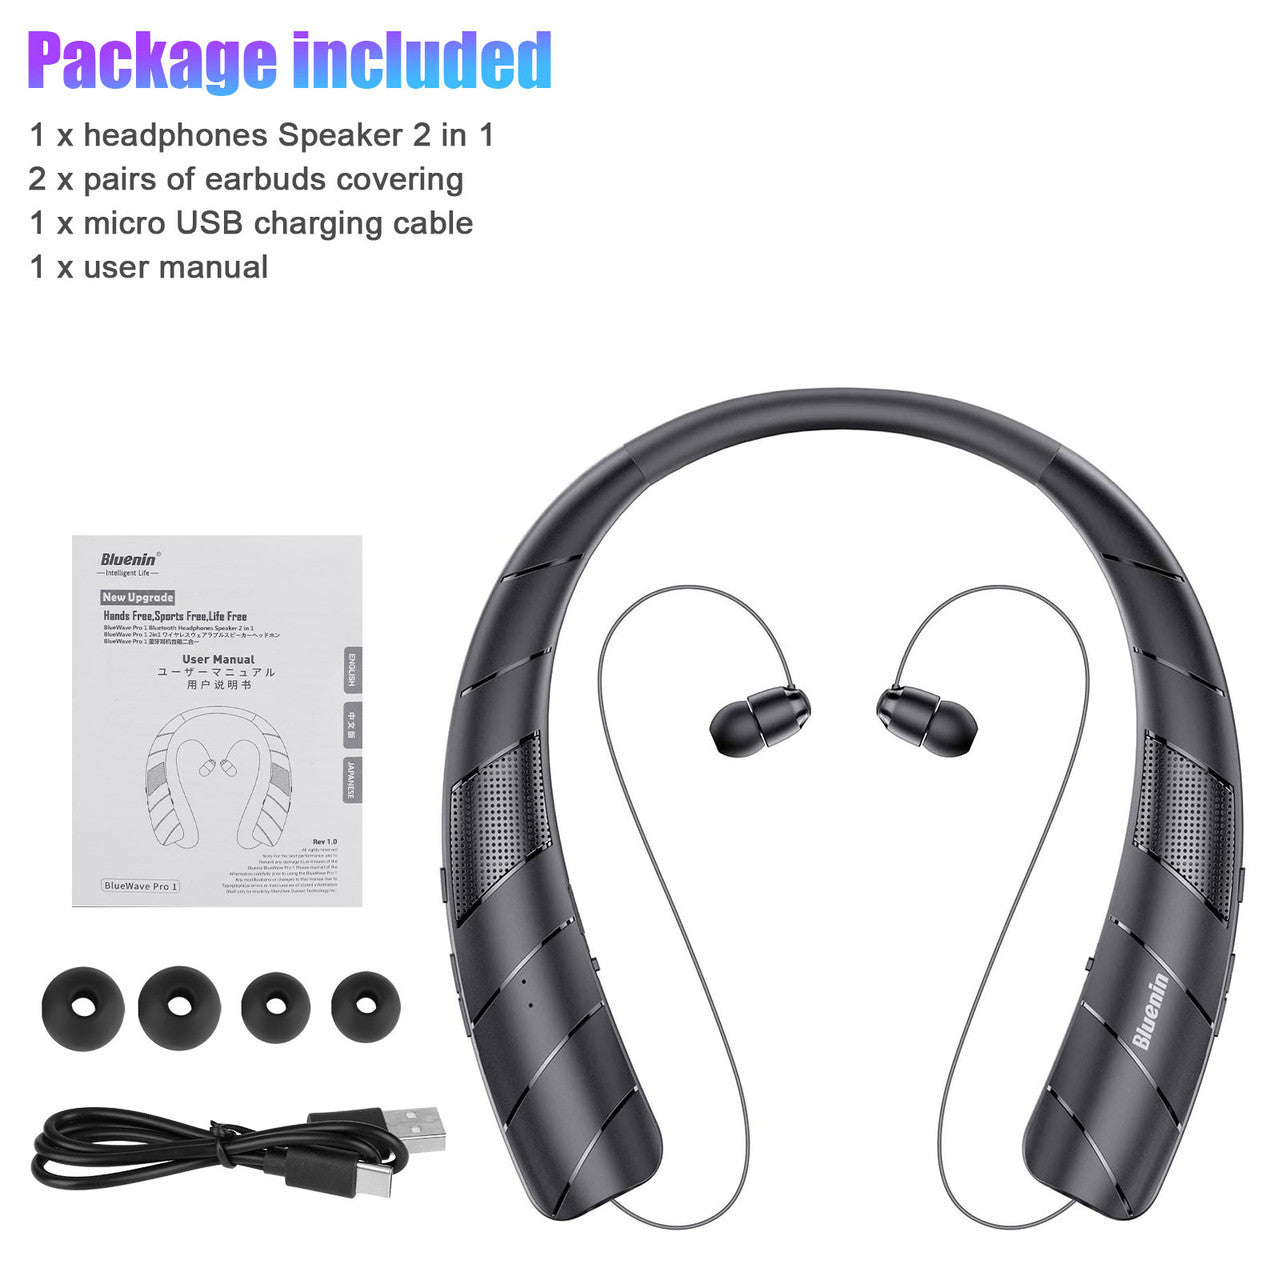 Bluetooth Headphones Speaker 2 in 1 with Stereo Surround Sound and Long Battery Life